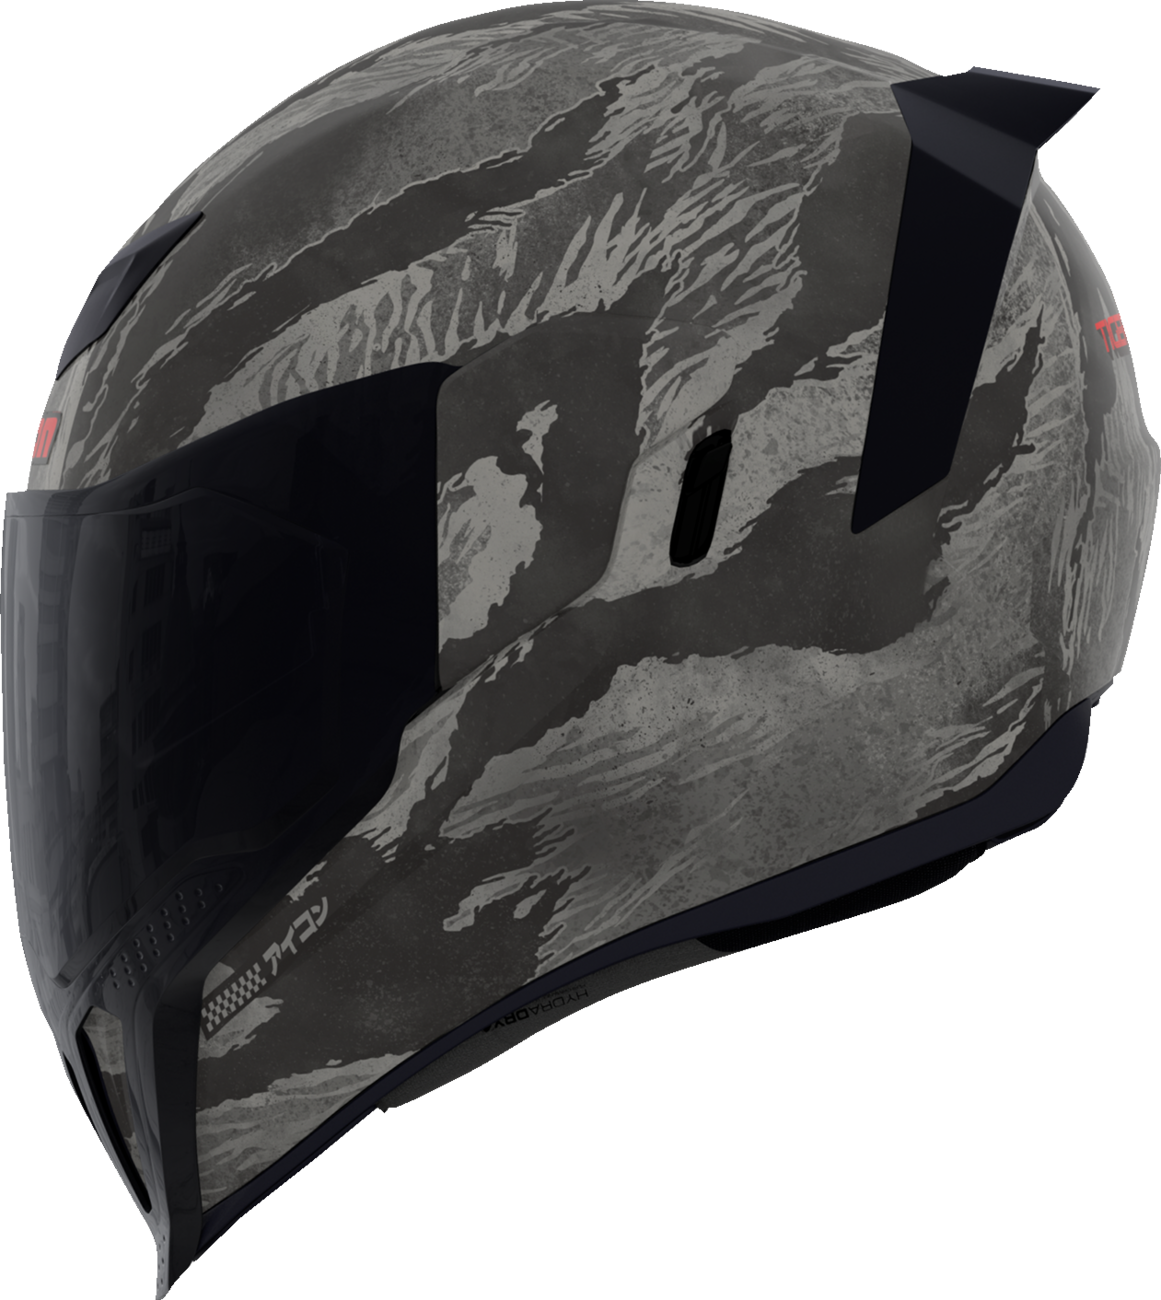 ICON Airflite™ Helmet - Tiger's Blood - MIPS® - Gray - Small 0101-16241